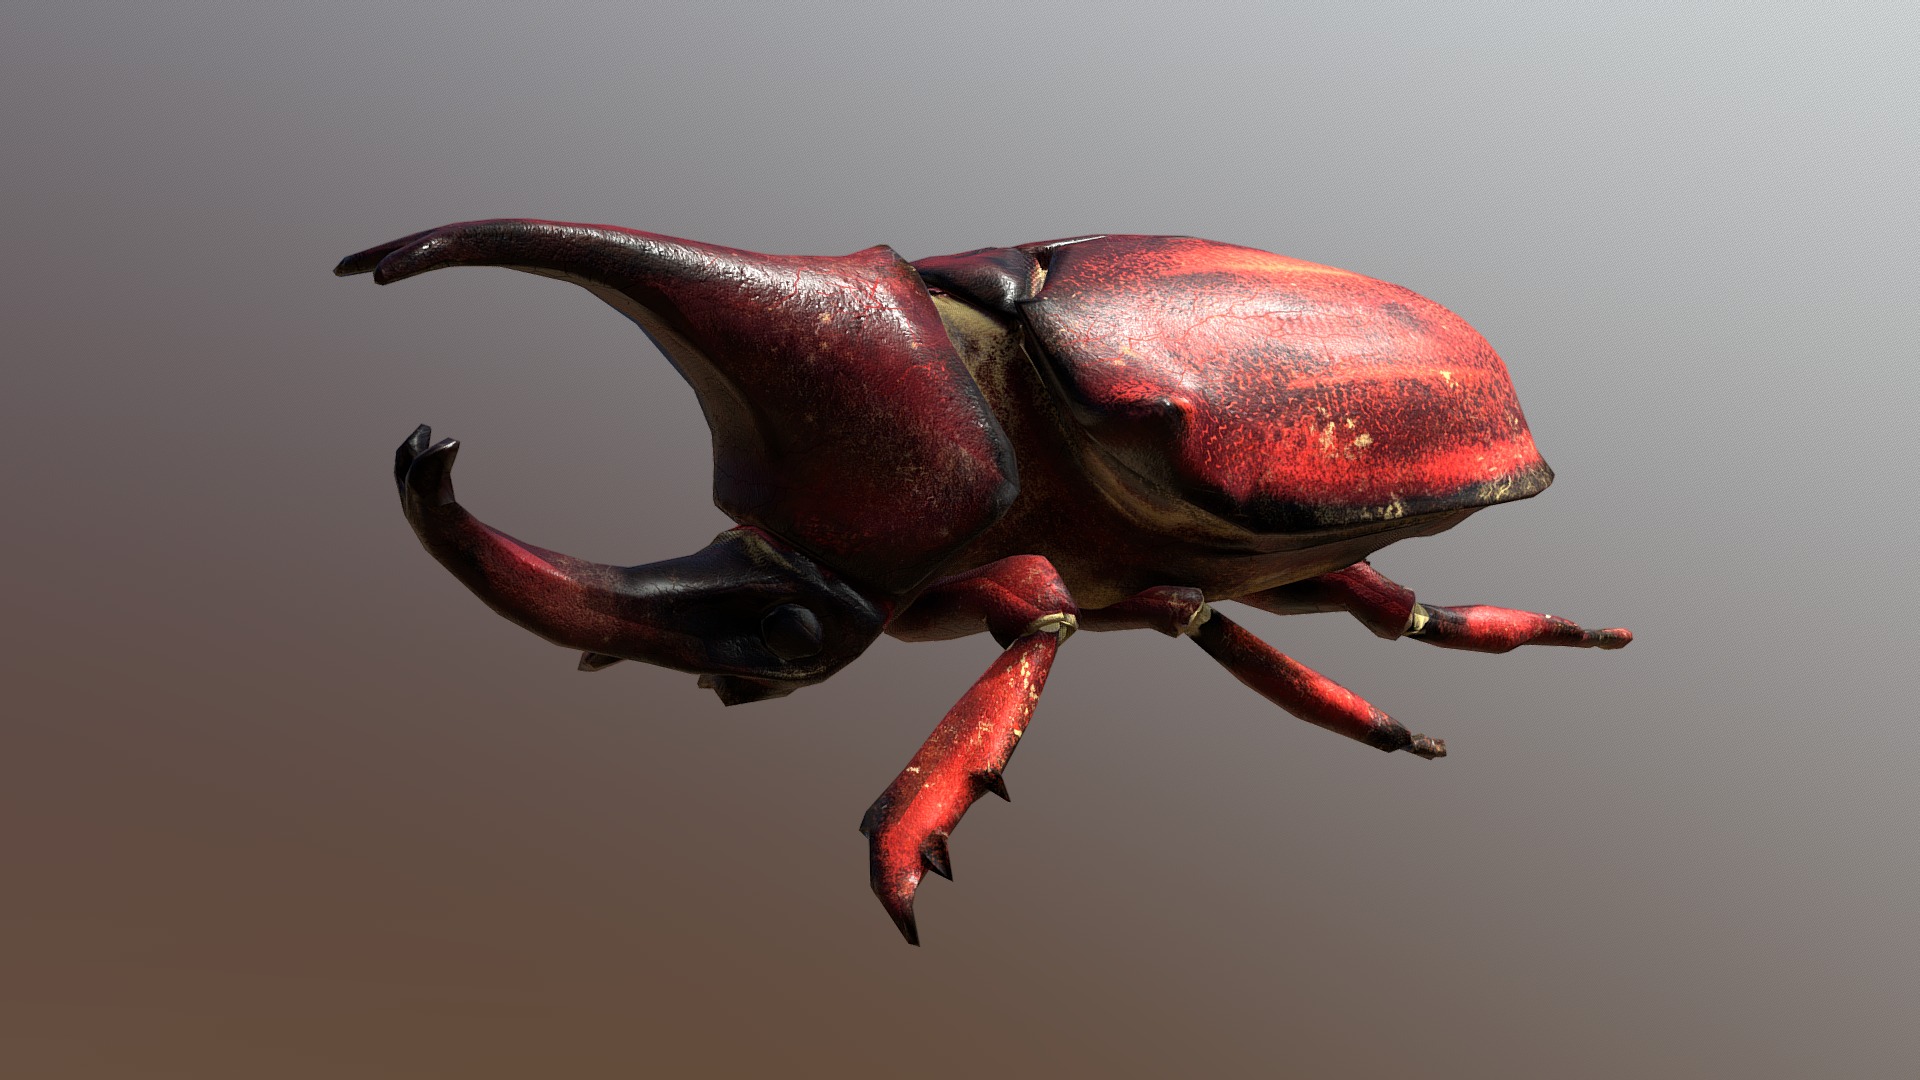 3D model A Rhino beetle - This is a 3D model of the A Rhino beetle. The 3D model is about a red and black crab.